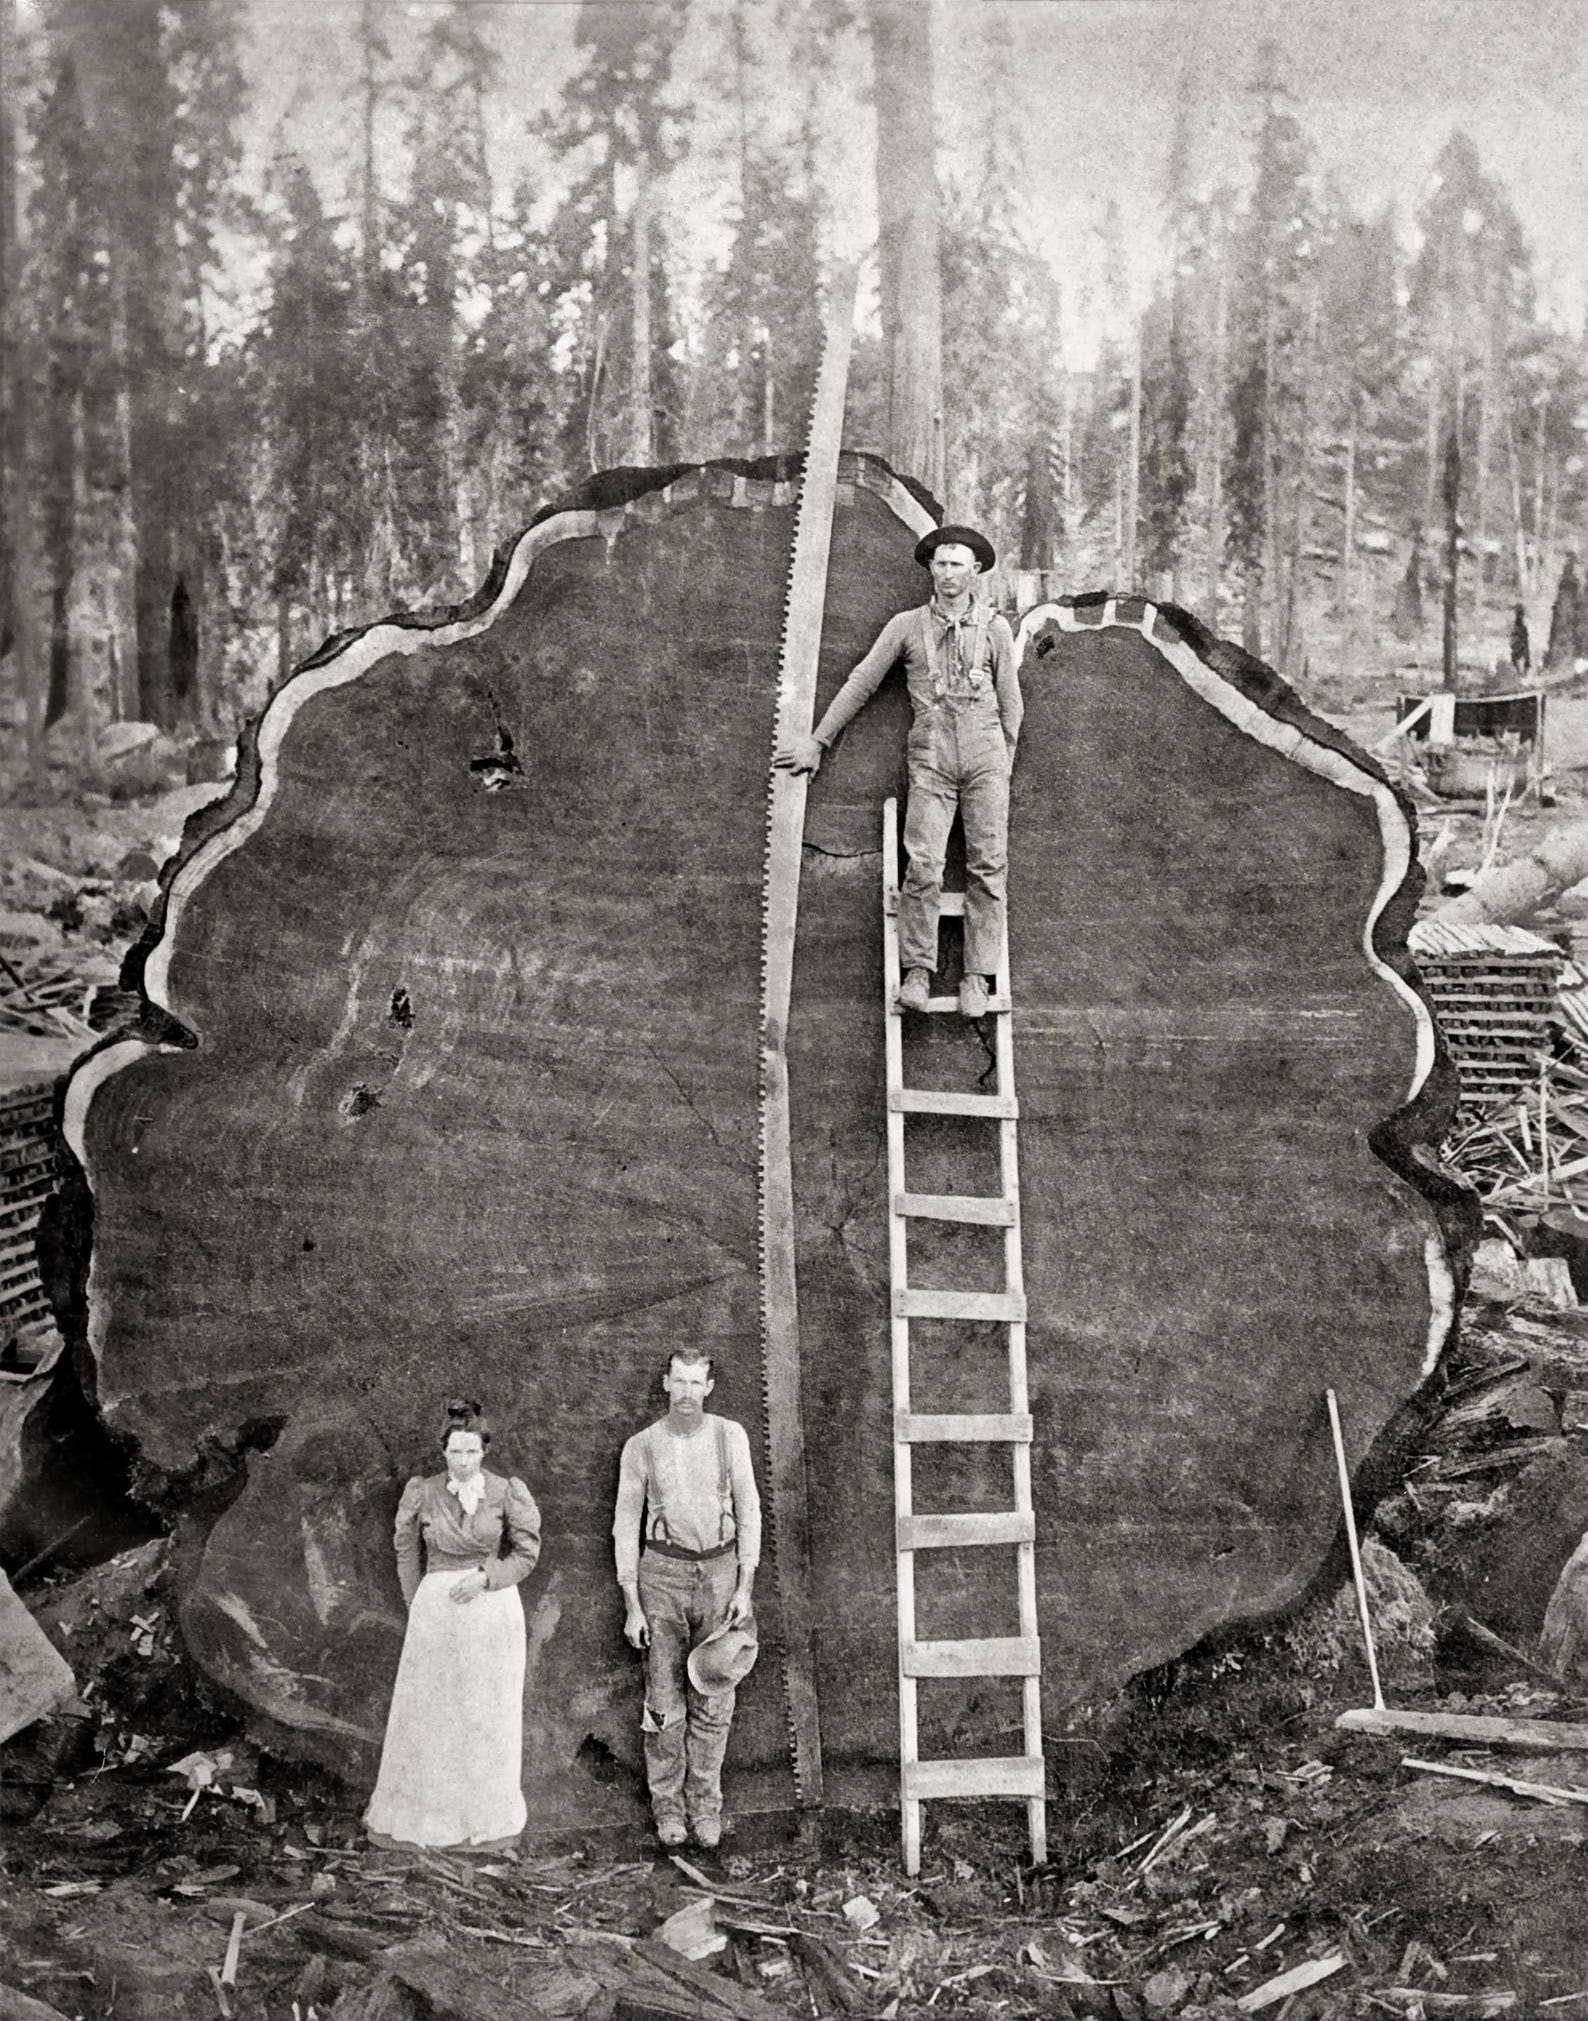 Giant Sequoia, Generals Highway, Three Rivers, Tulare County, CA, 1900 Historical Pix